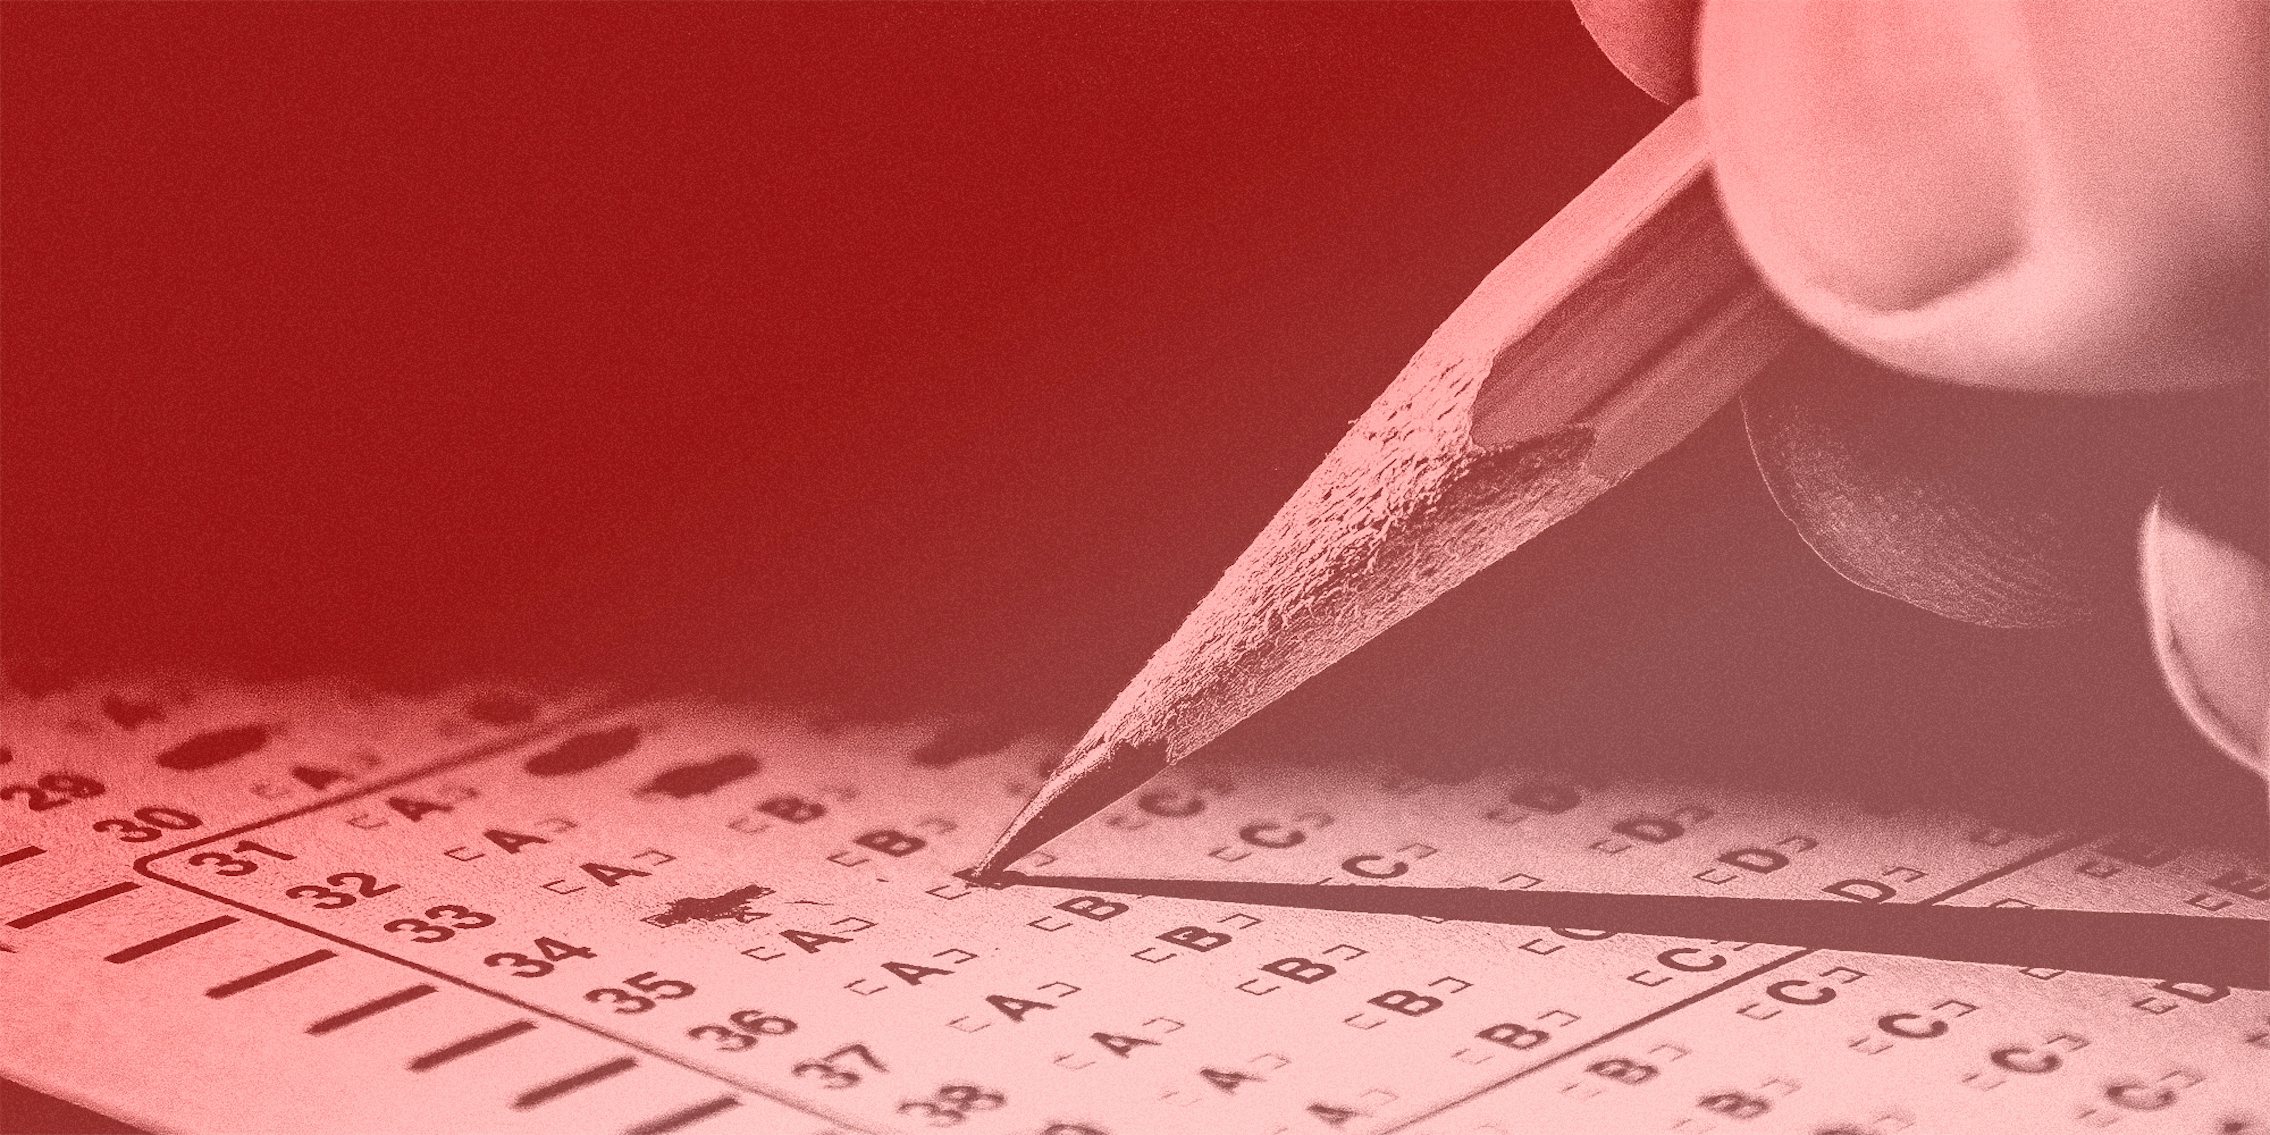 A standardized test being filled out with a pencil.